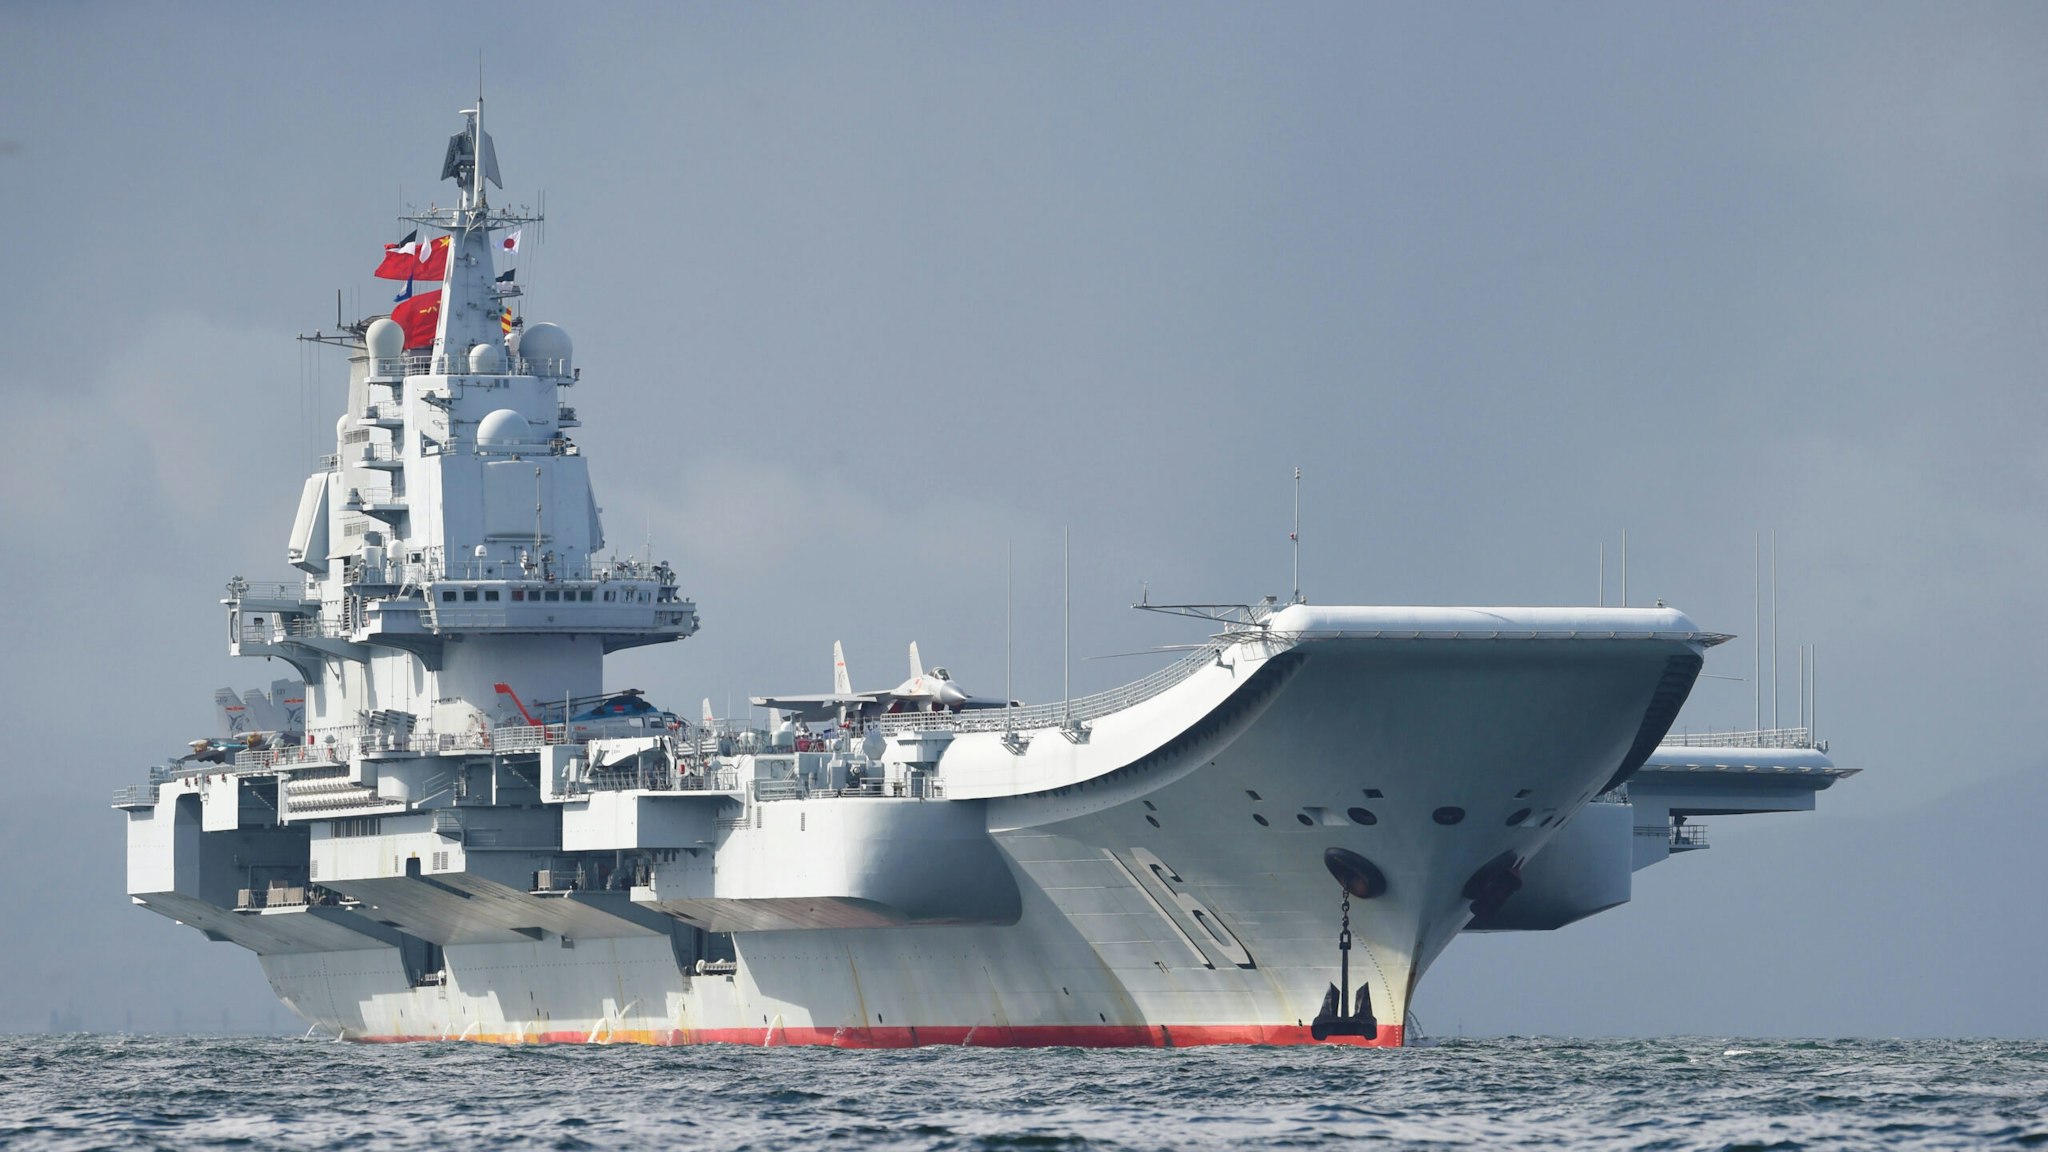 China's sole aircraft carrier, the Liaoning, arrives in Hong Kong waters on July 7, 2017, less than a week after a high-profile visit by president Xi Jinping. China's national defence ministry had said the Liaoning, named after a northeastern Chinese province, was part of a flotilla on a "routine training mission" and would make a port of call in the former British colony.